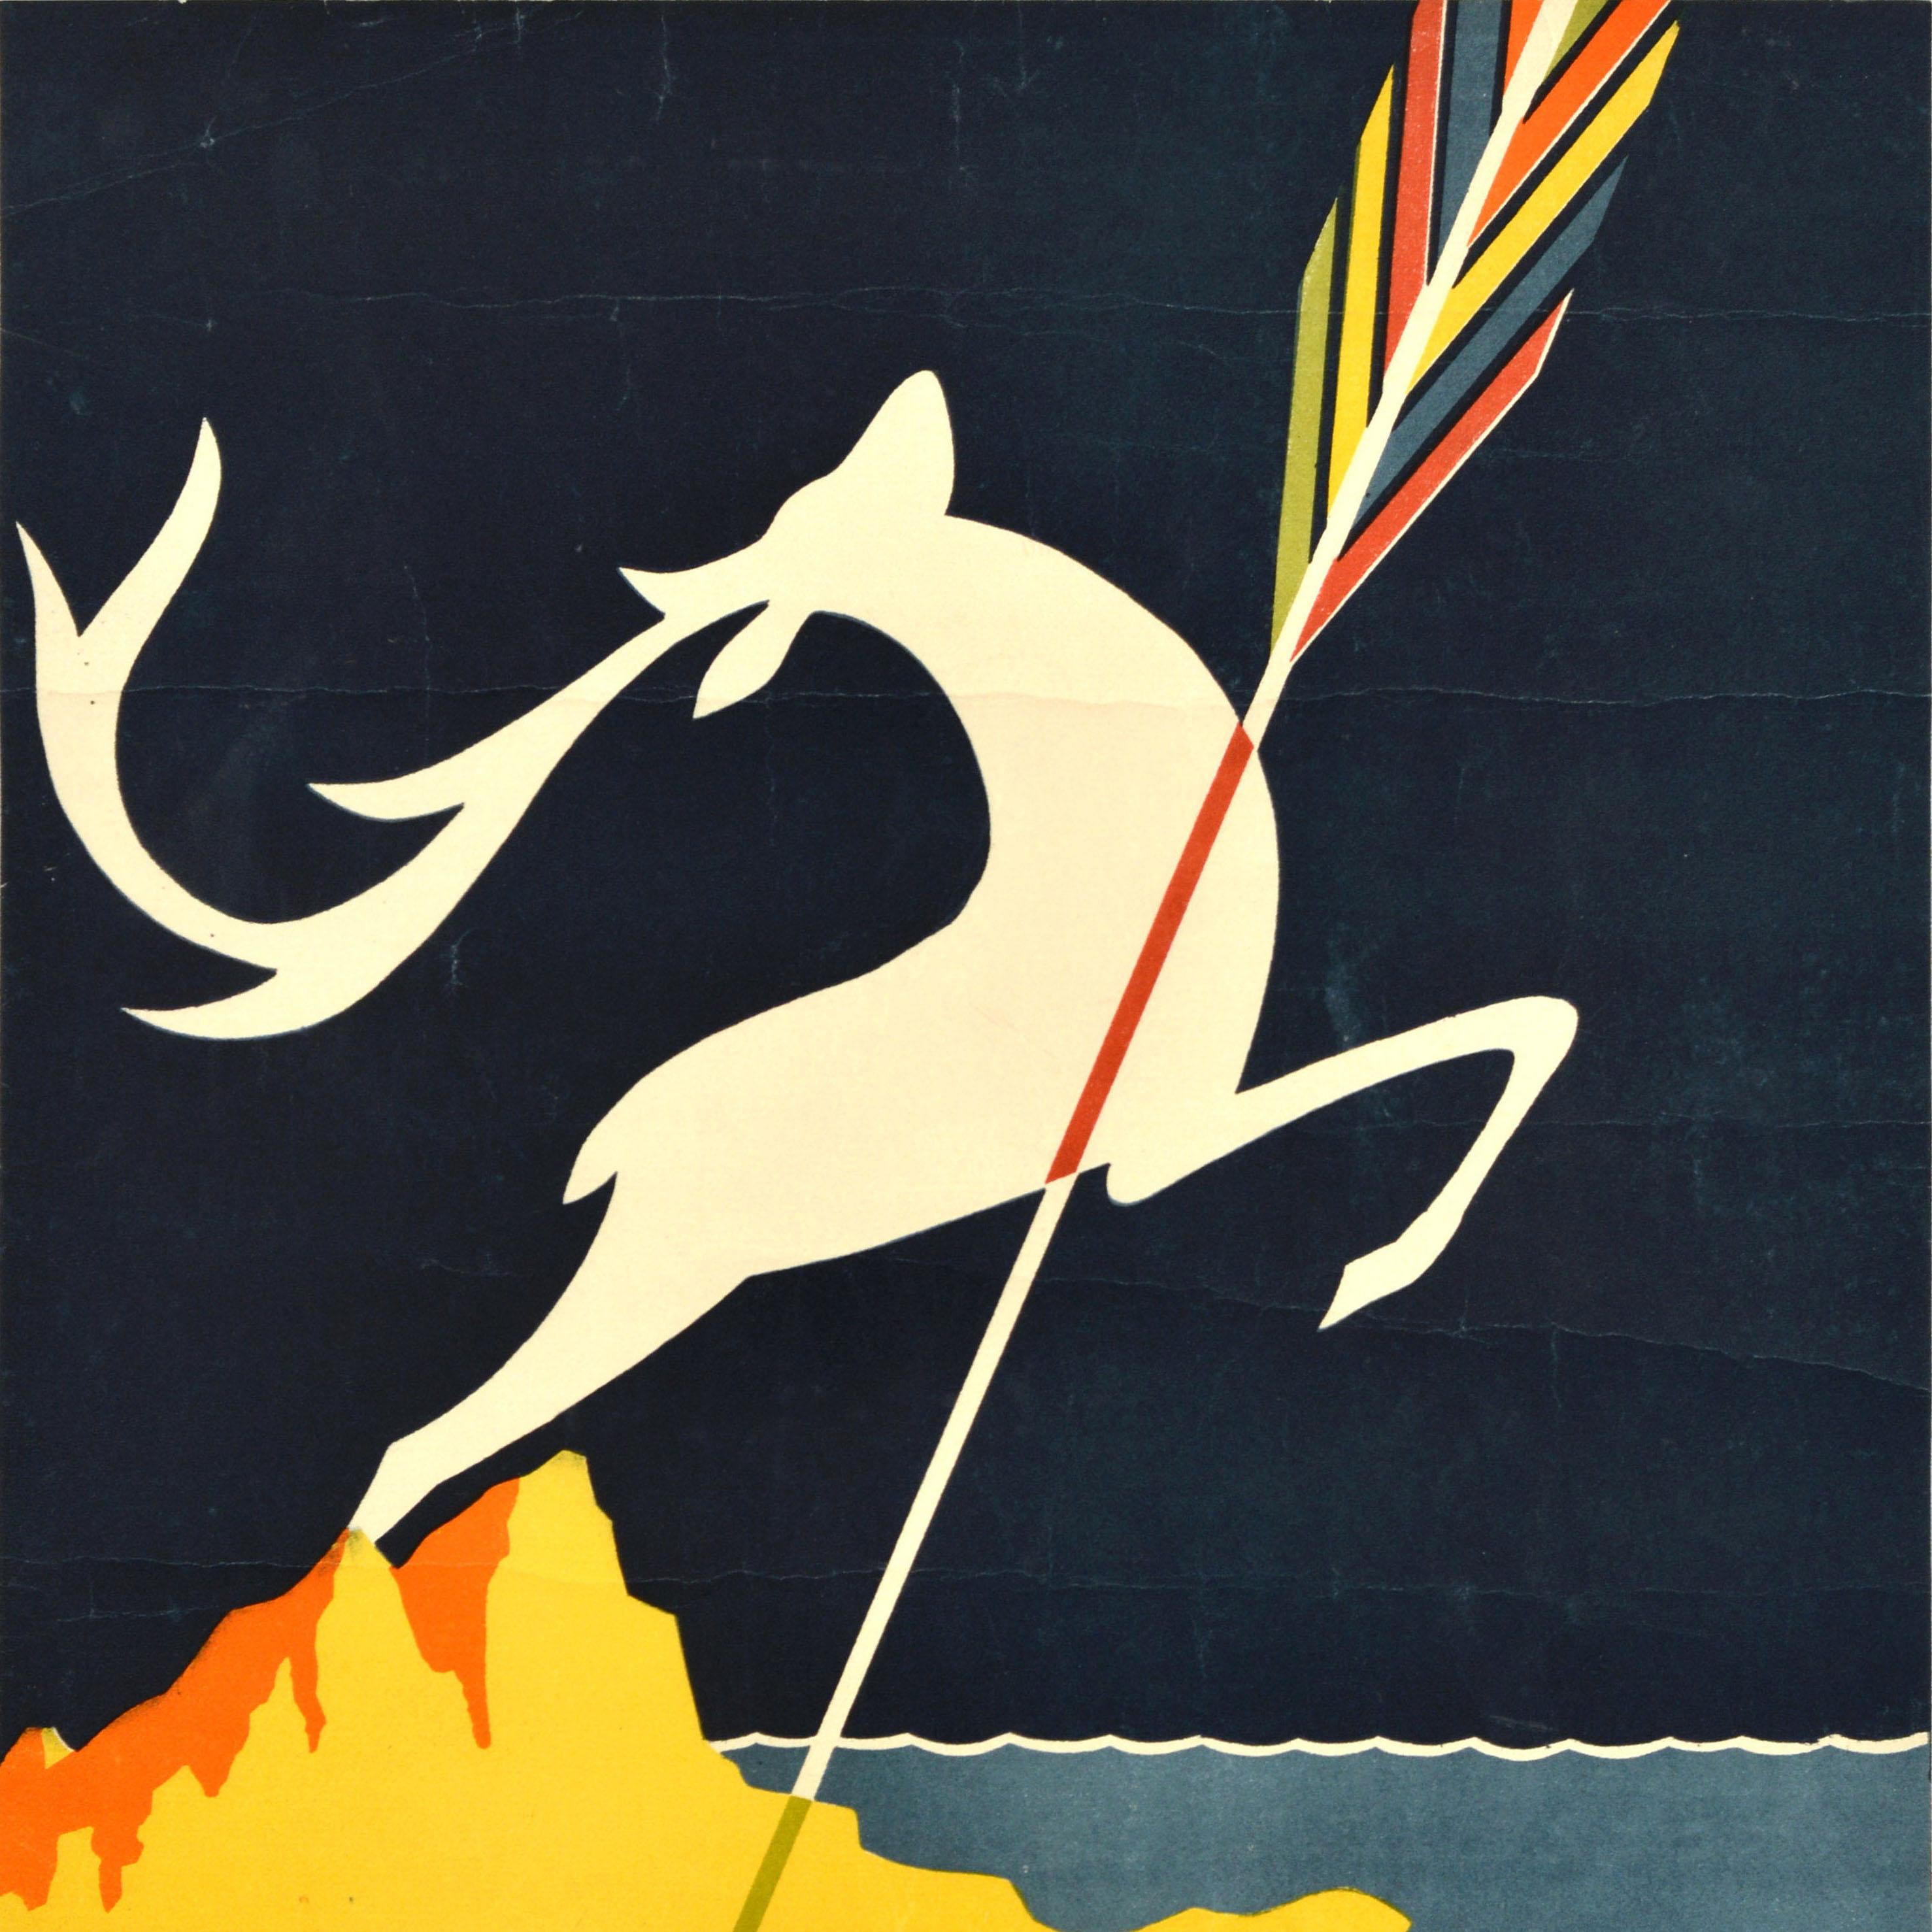 Original vintage Soviet Intourist travel advertising poster - Hunting in Crimea Yalta - featuring a colourful arrow pointing down at the holiday resort city of Yalta on the Black Sea with the shape in white of a deer leaping from the Crimean